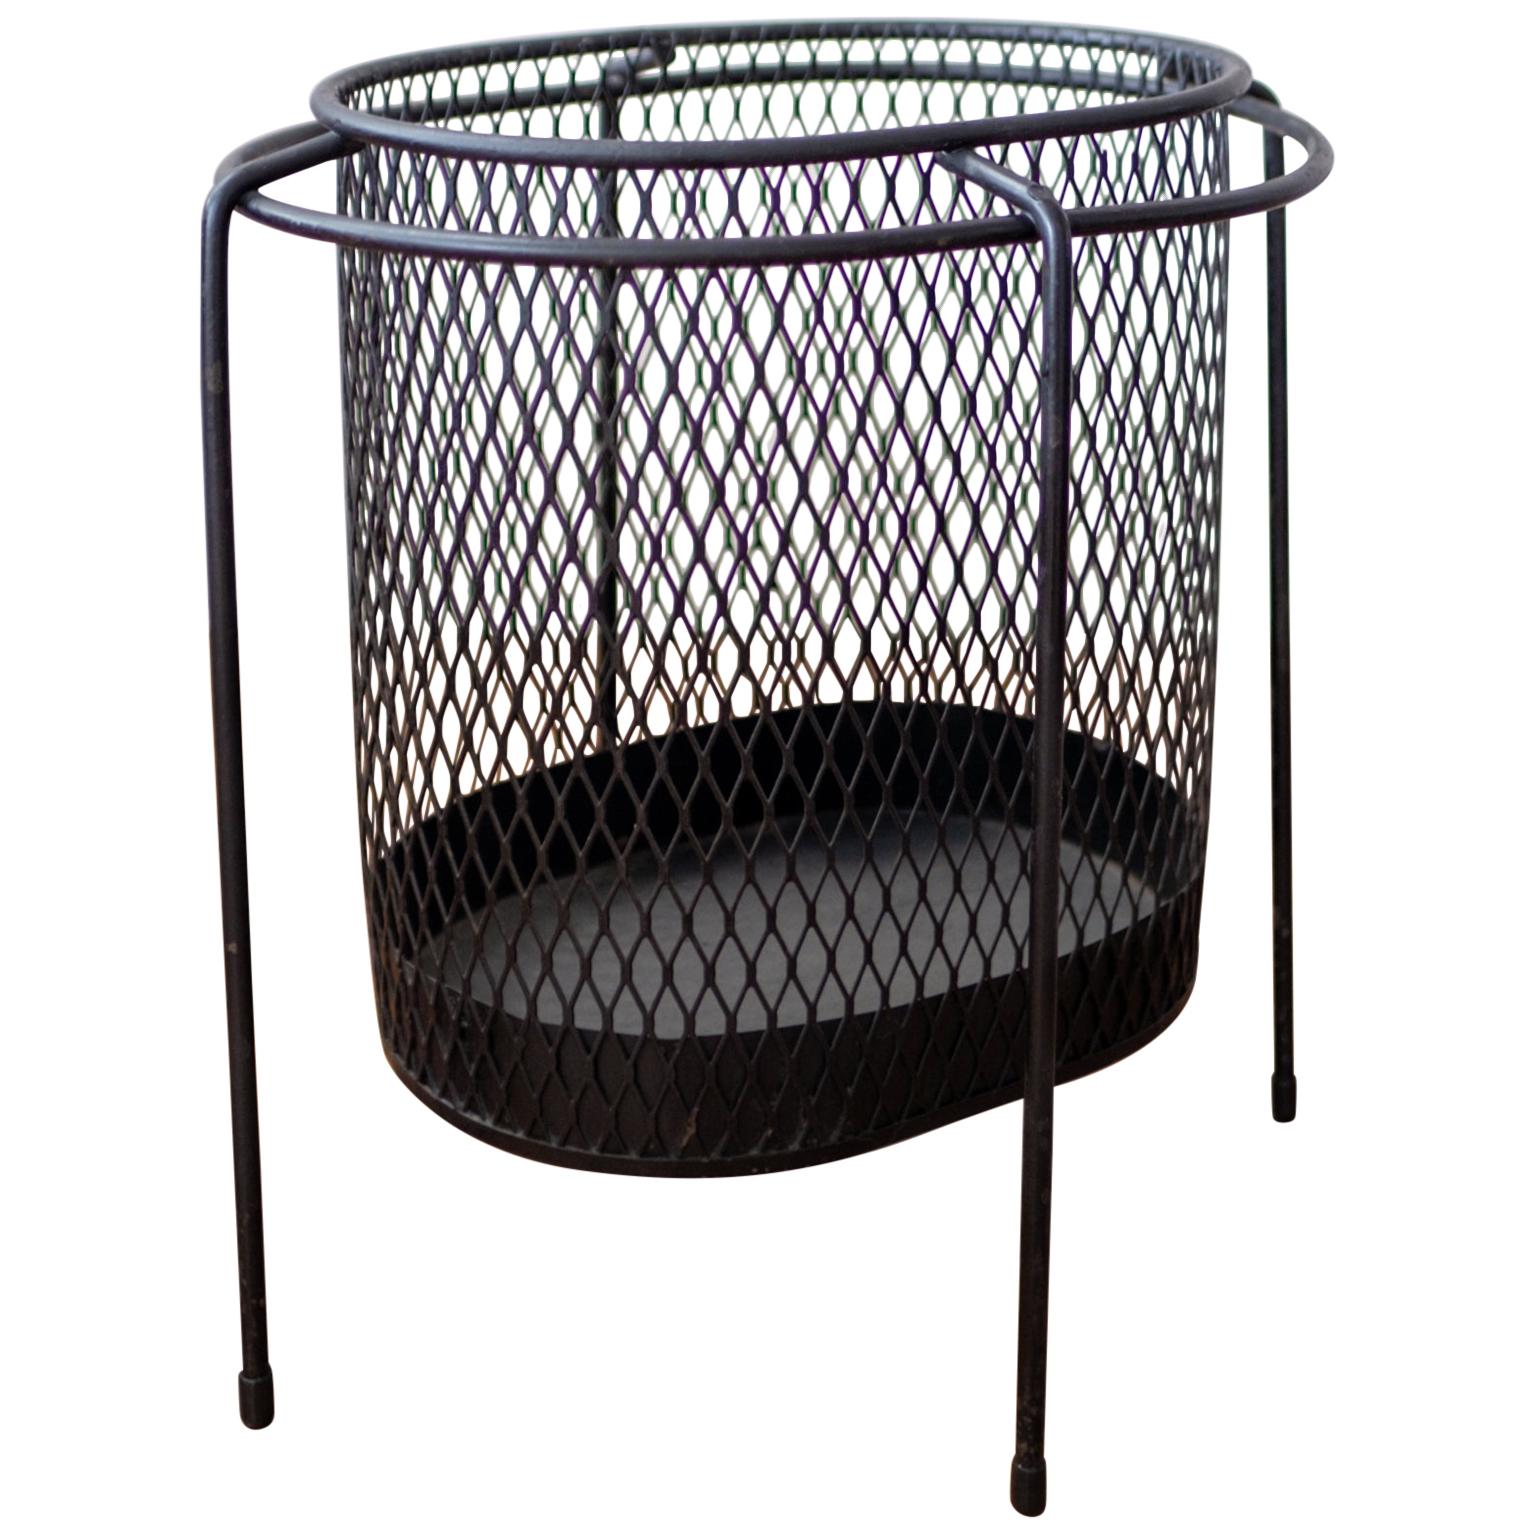 Midcentury Iron and Expanded Metal Waste Basket